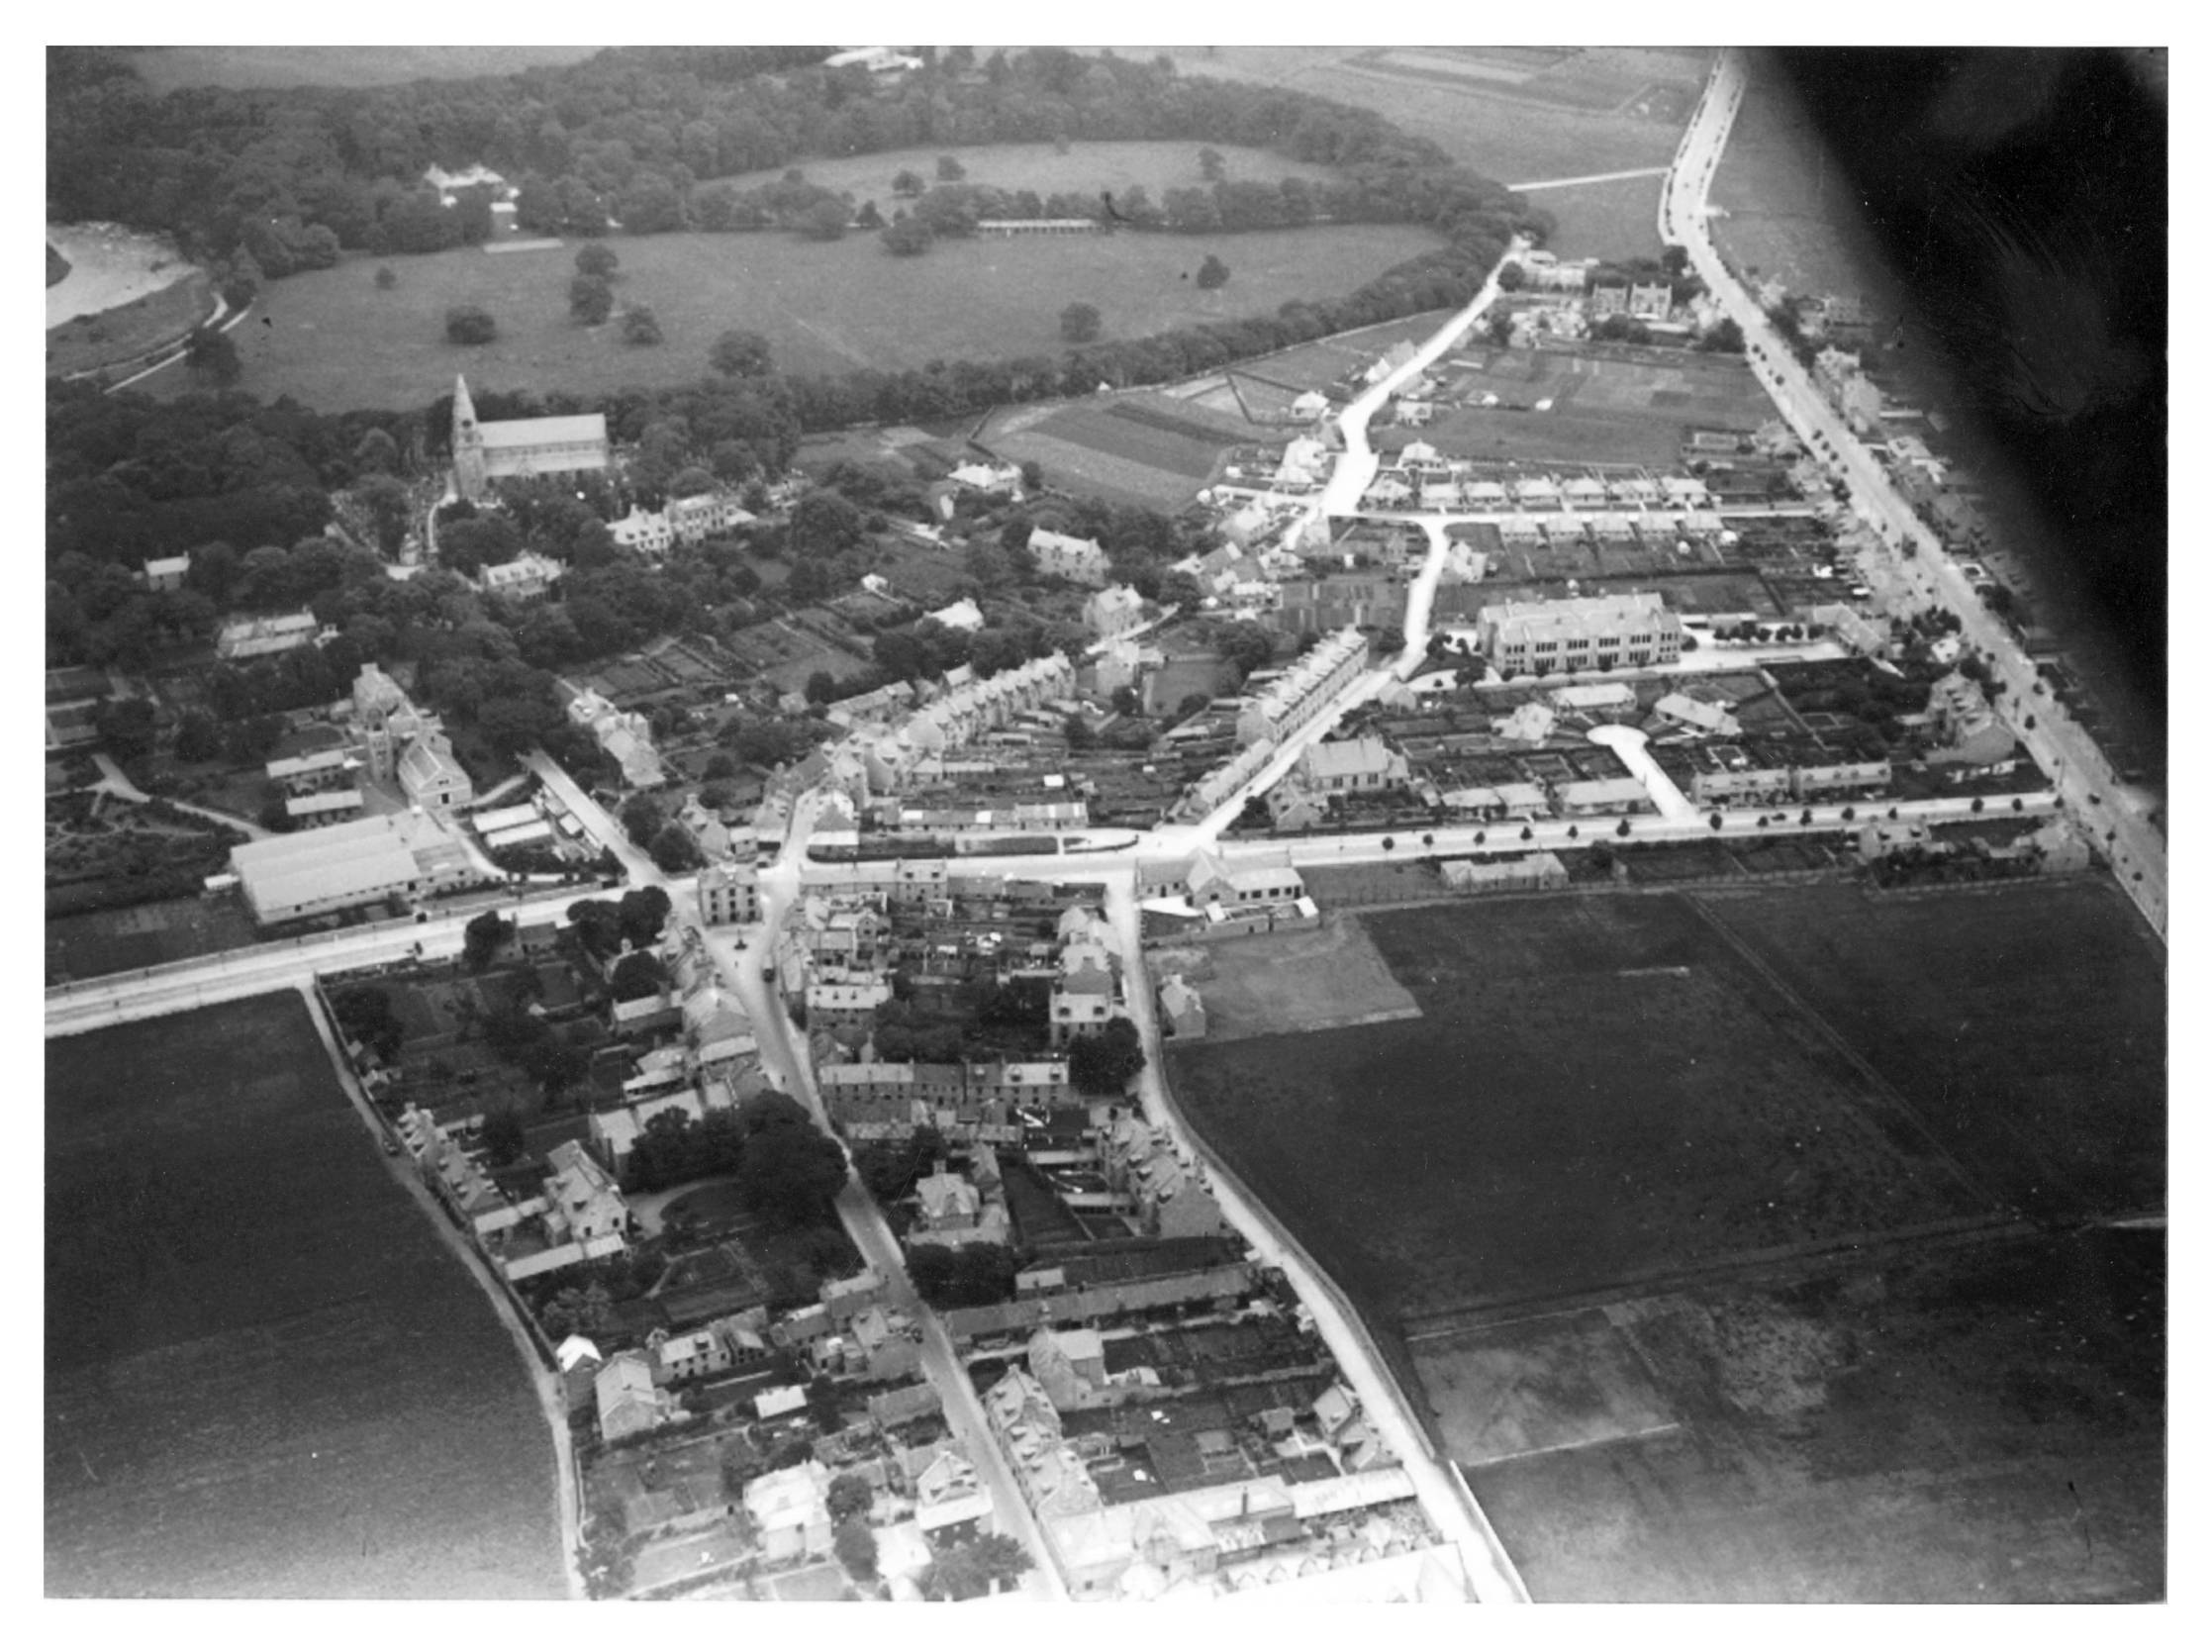 1930s: An aerial picture showing Old Aberdeen, Seaton Park and St Machar's Cathedral.